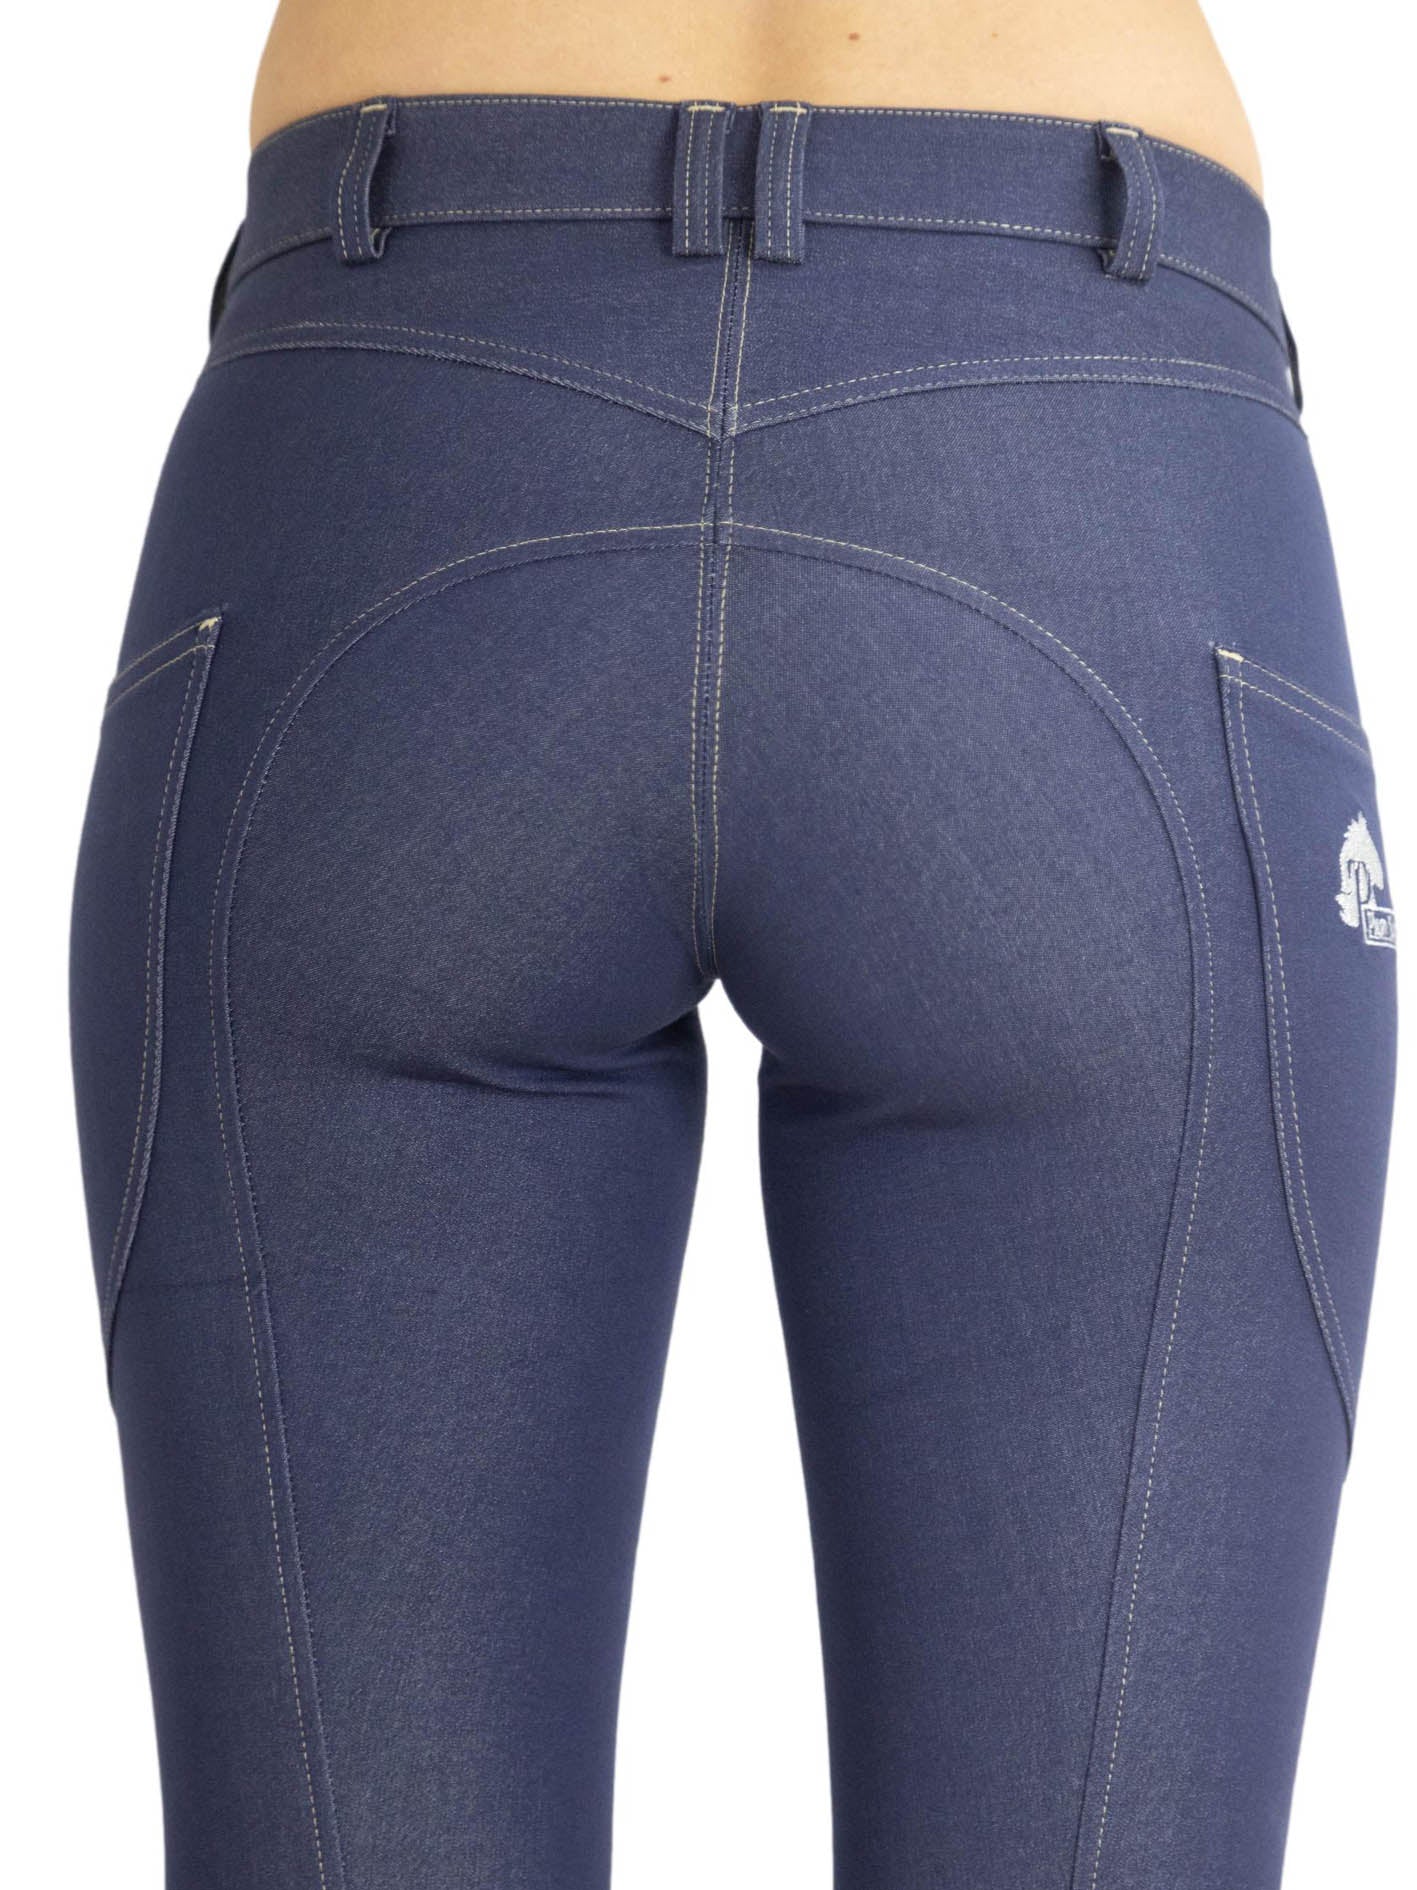 Denim Breeches with phone pocket and NO silicone